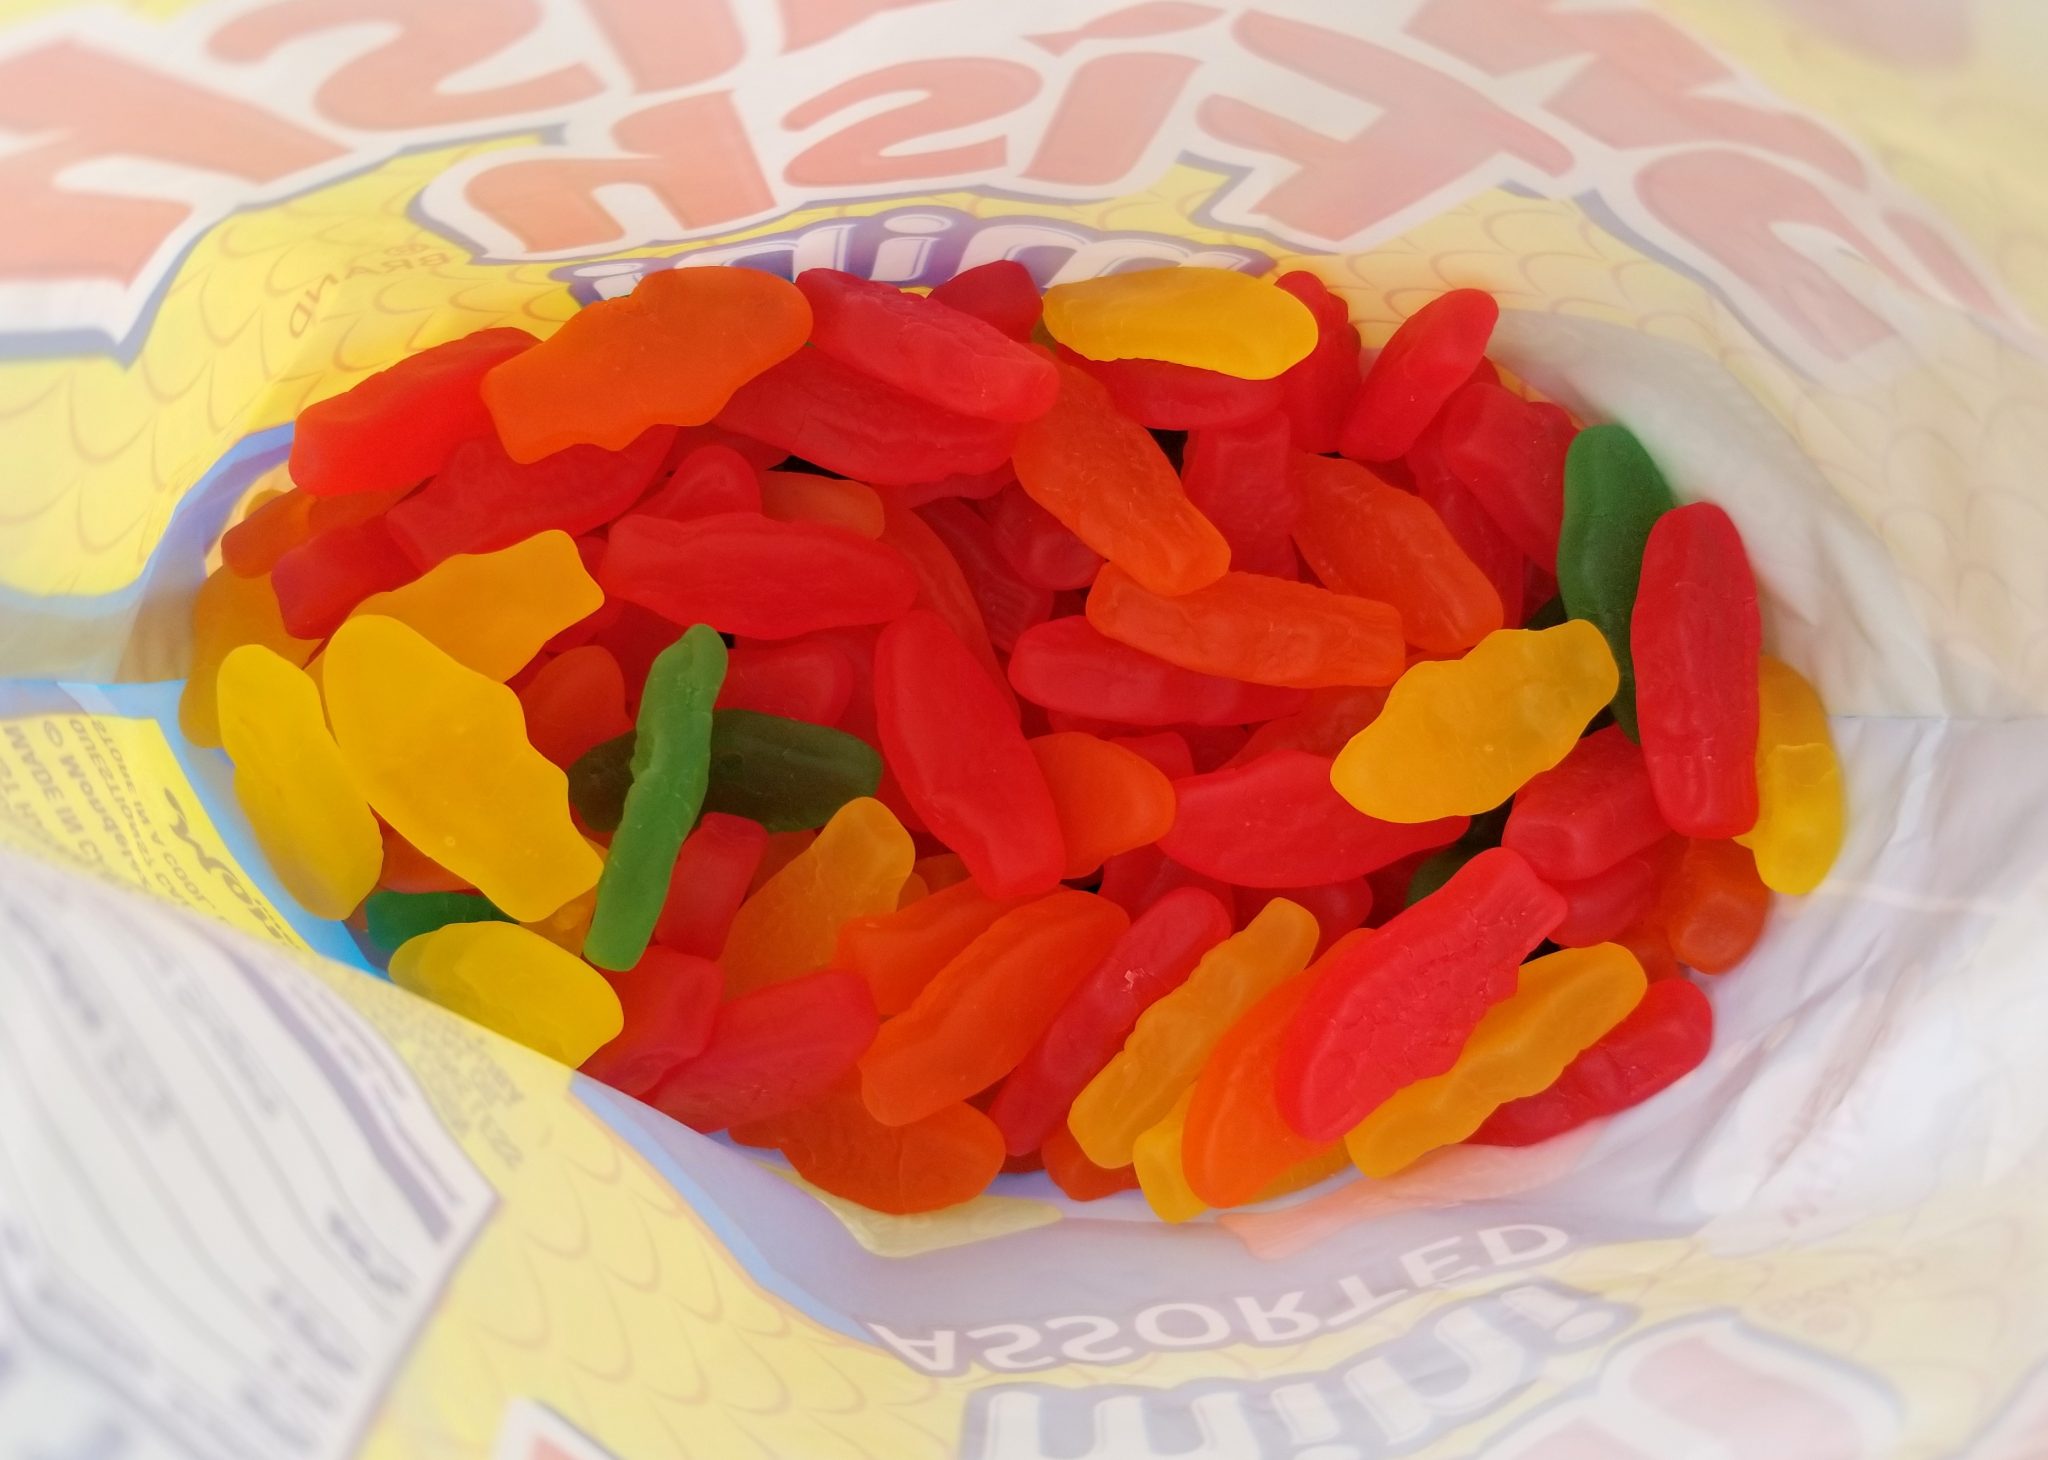 Wilmington, Delaware, U.S.A - August 11, 2020 - Variety of Swedish Fish flavored candies inside a bag